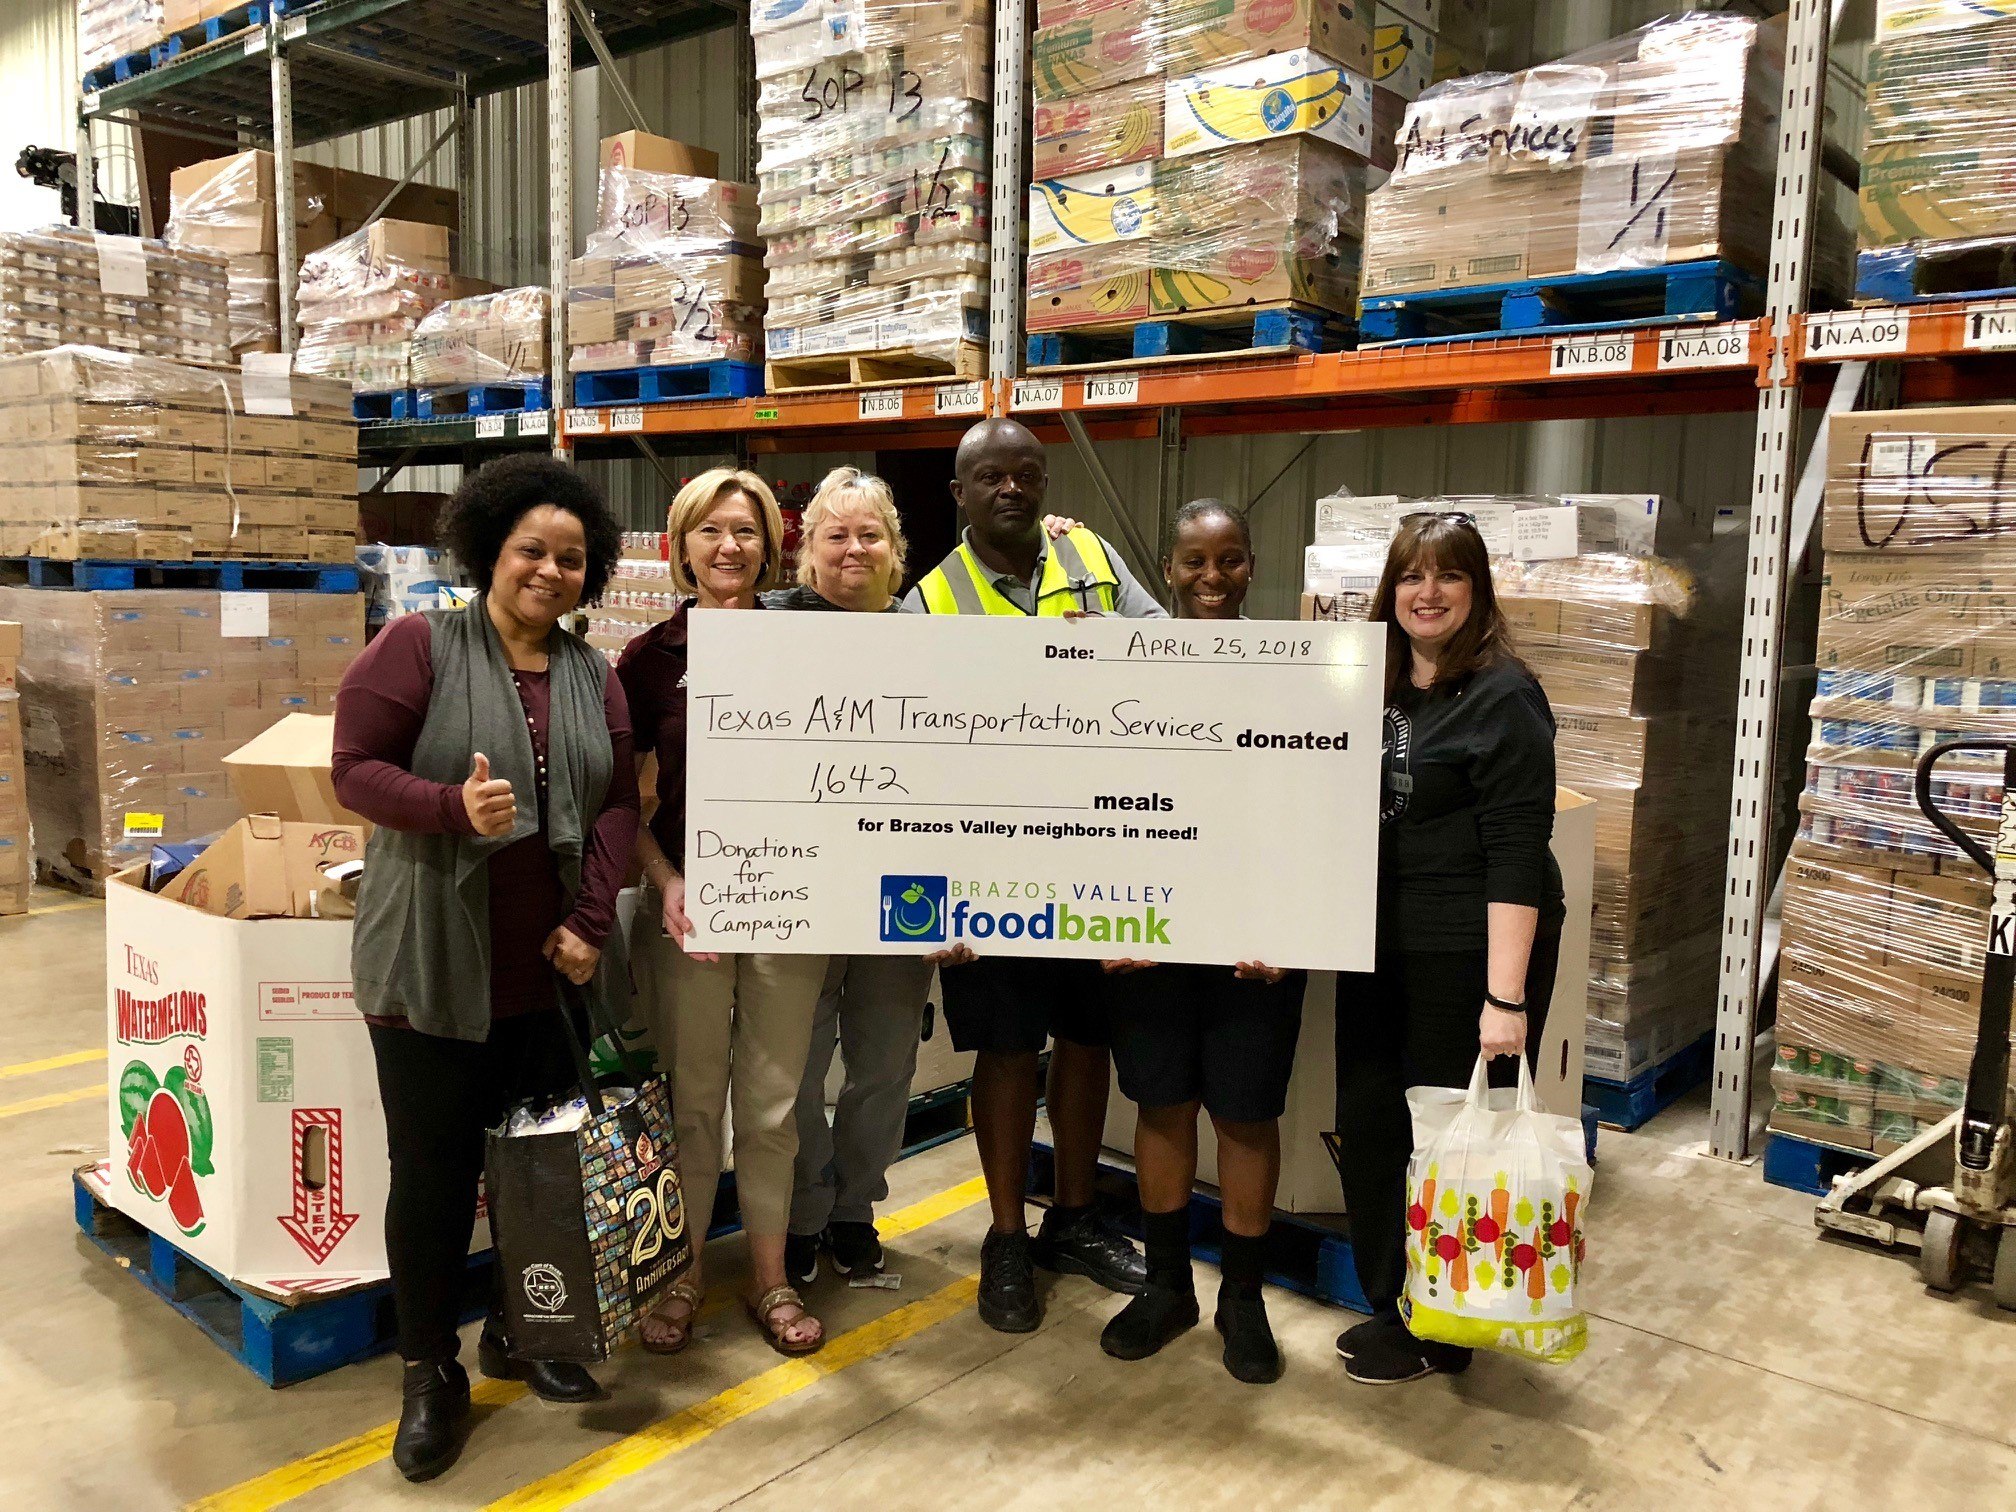 The Texas A&M Transportation Services annual Food for Fines campaign collected 1,970 pounds worth of food item donations for the Brazos Valley Food Bank. (Texas A&M University Transportation Services)